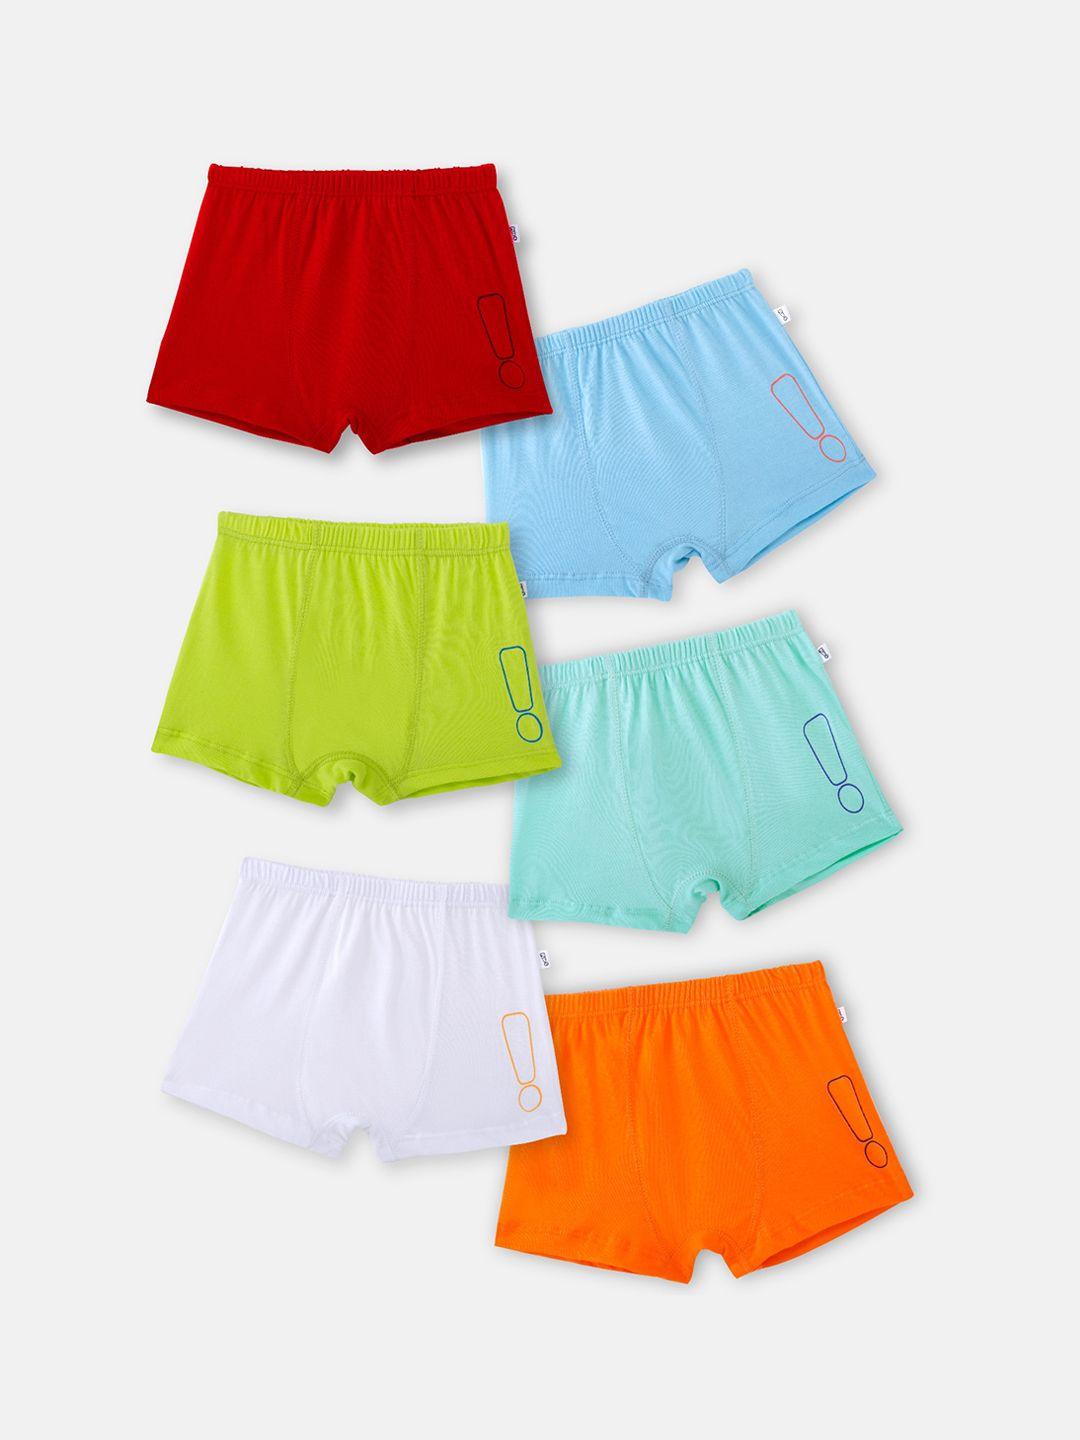 you-got-plan-b-girl-pack-of-6-cotton-boxer-style